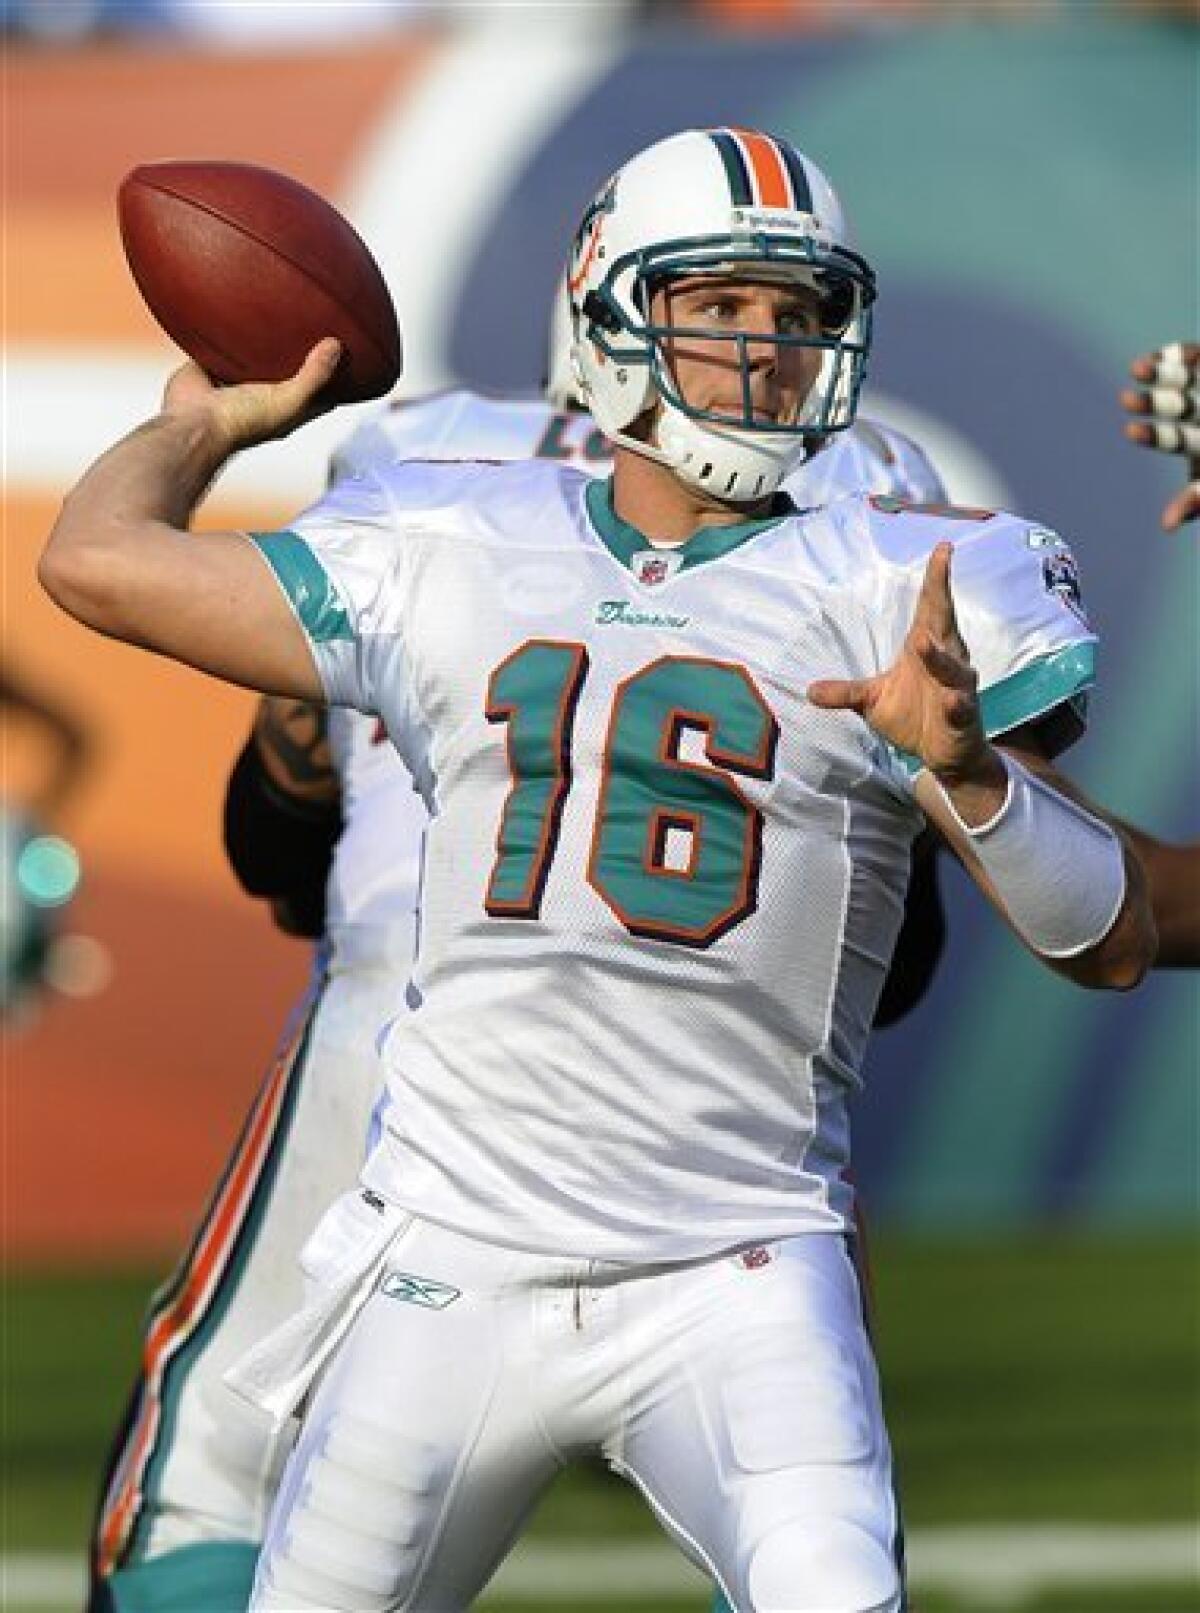 Dolphins need 3 QBs to beat Titans 29-17 - The San Diego Union-Tribune